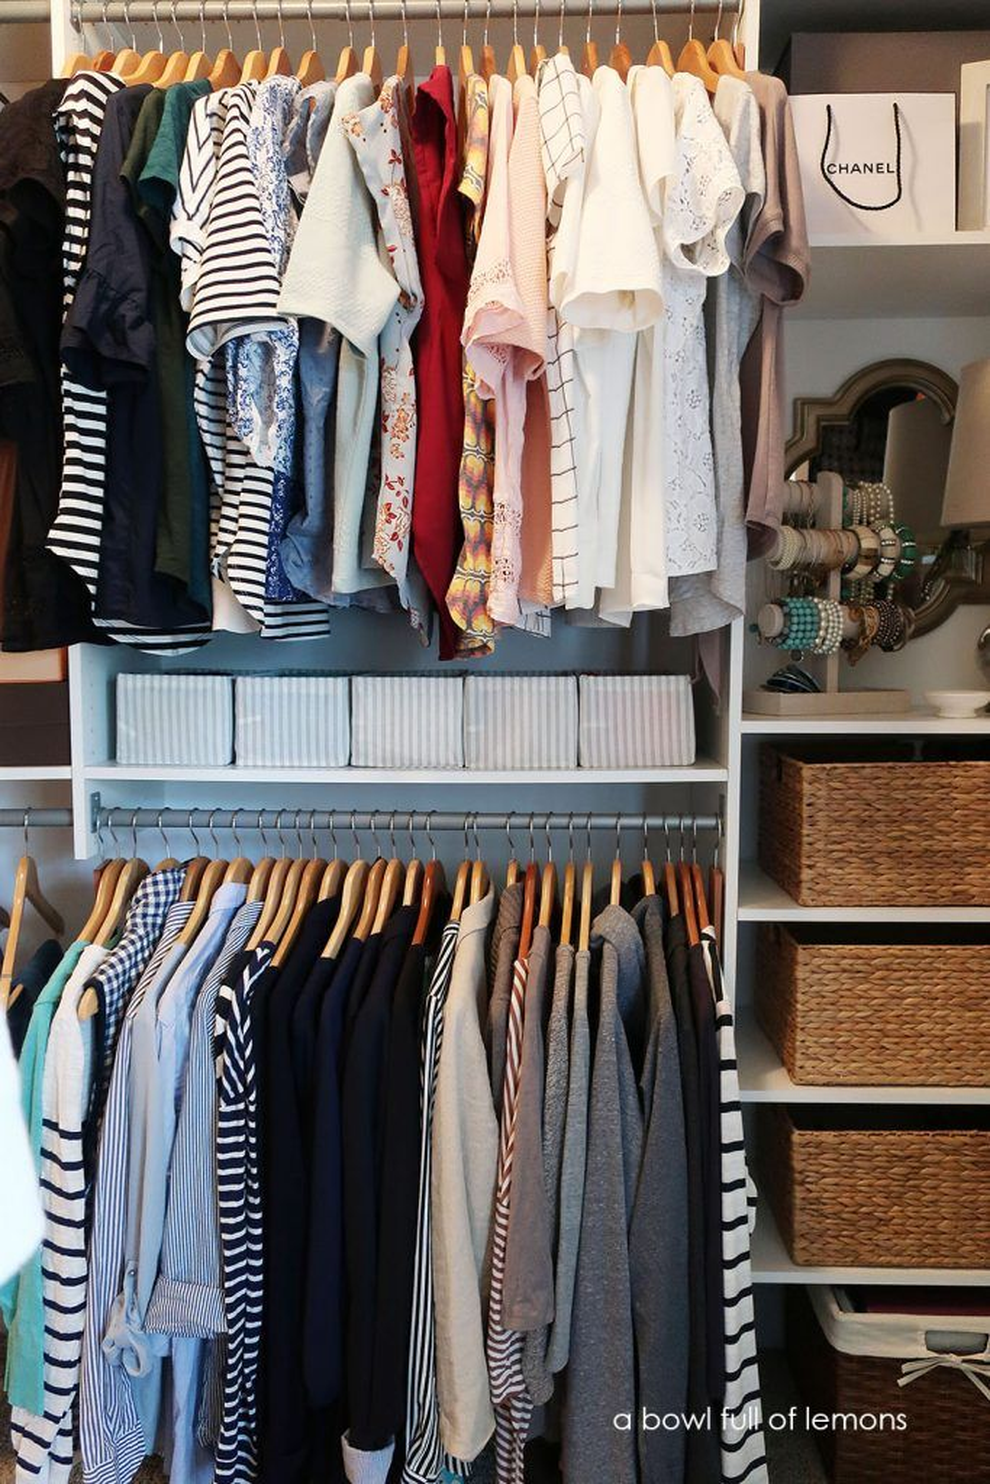 15 ideas to save space for small wardrobe - 12